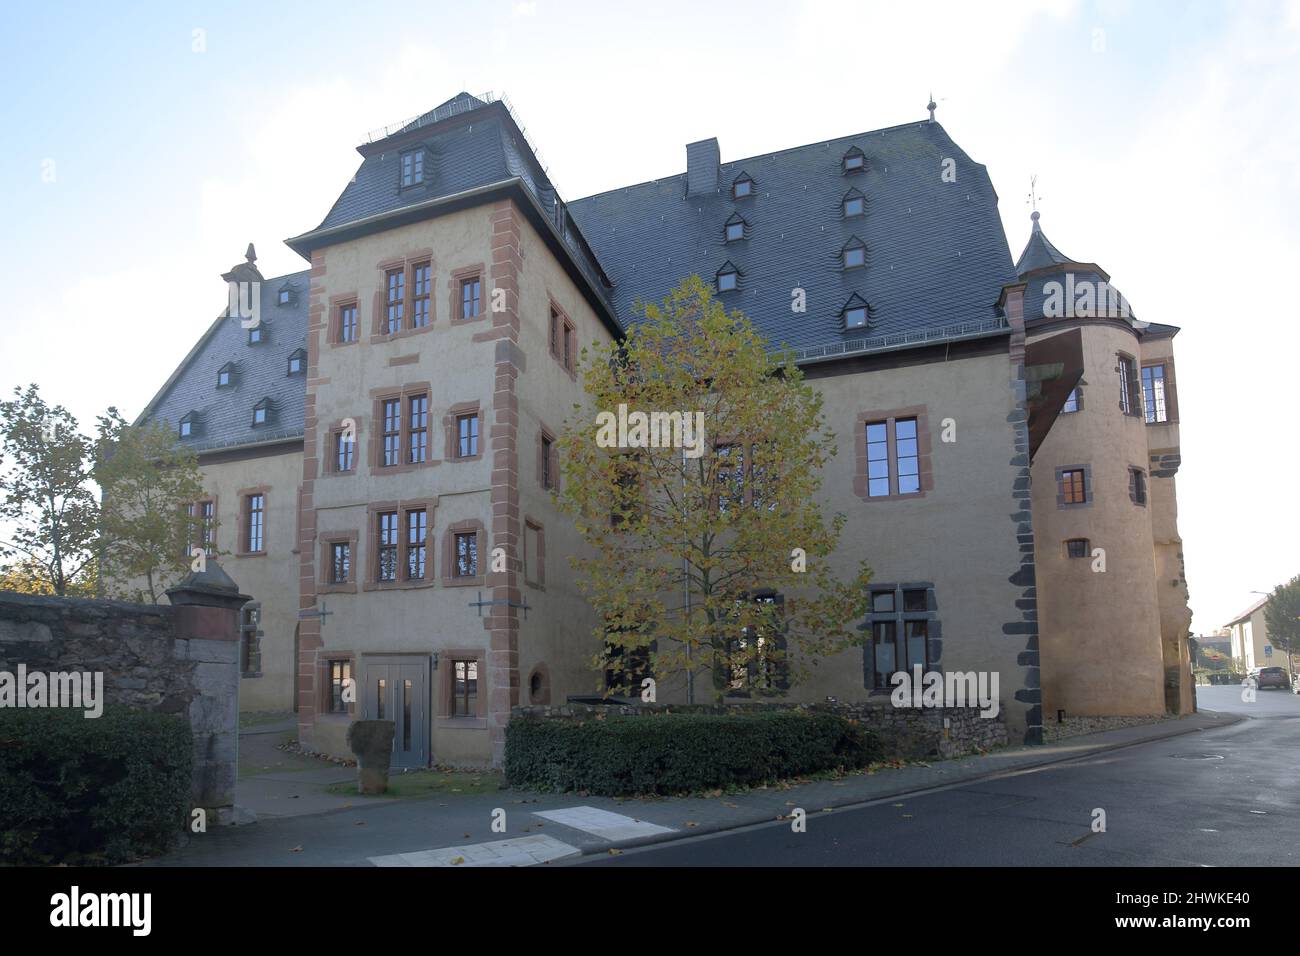 Butzbach High Resolution Stock Photography and Images - Alamy